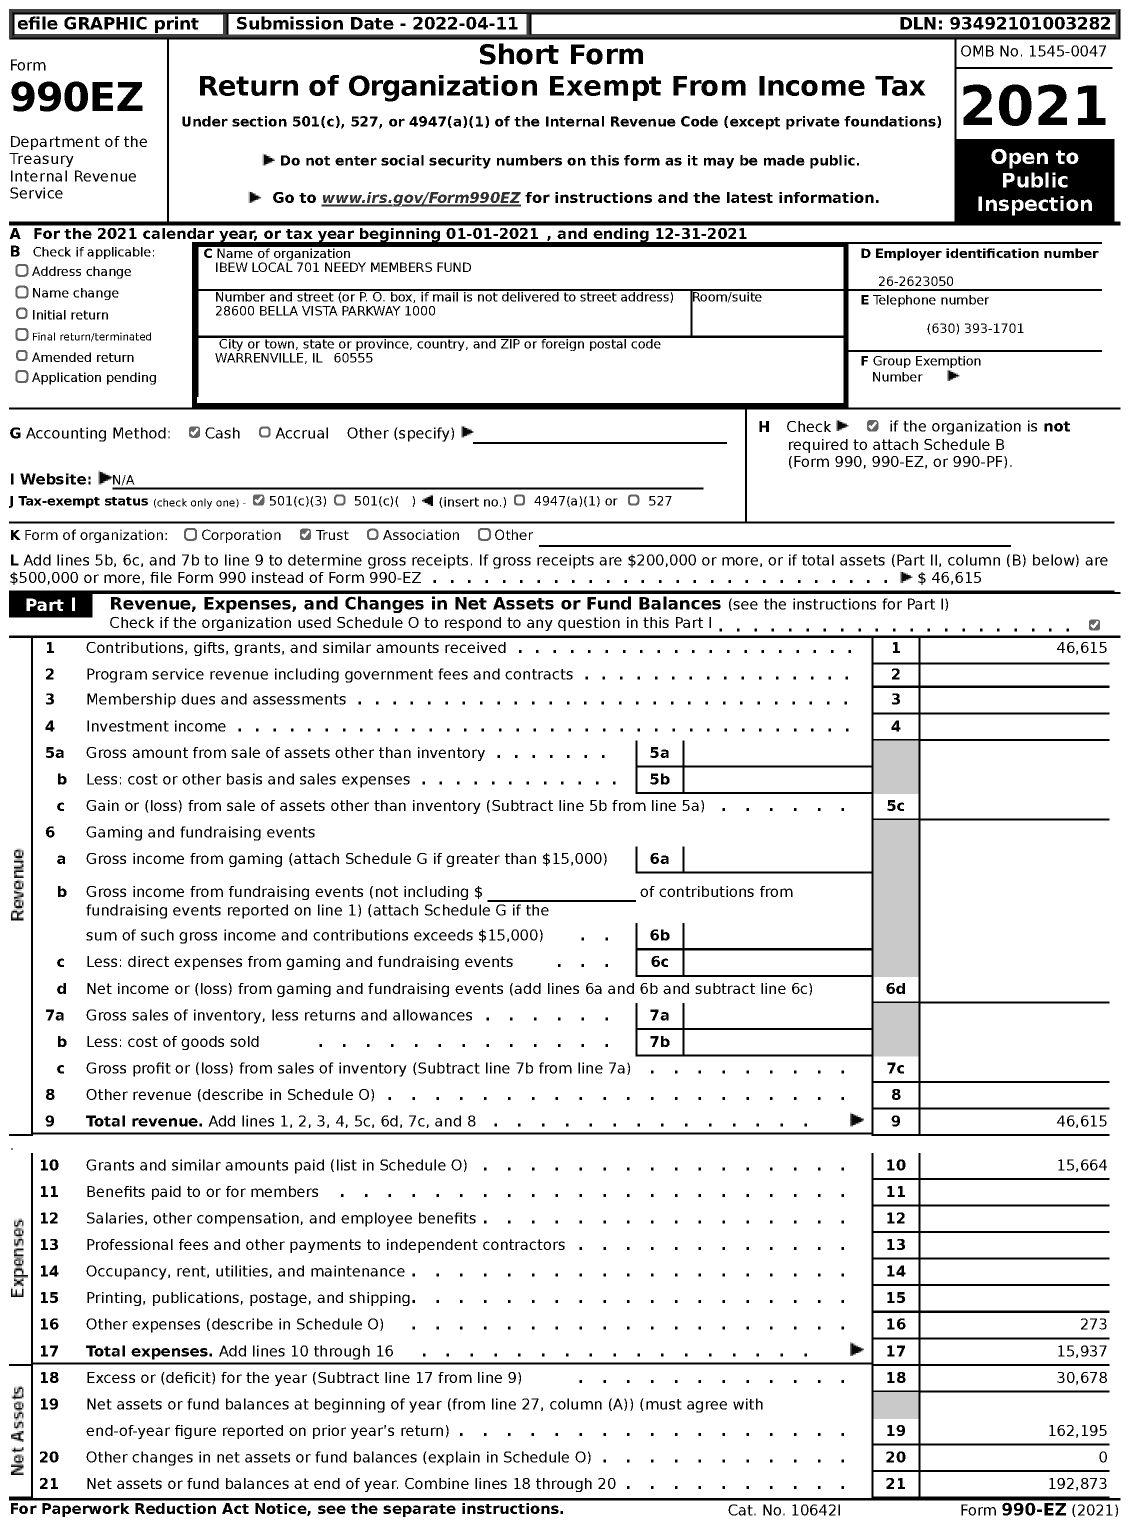 Image of first page of 2021 Form 990EZ for IBEW Local 701 Needy Members Fund